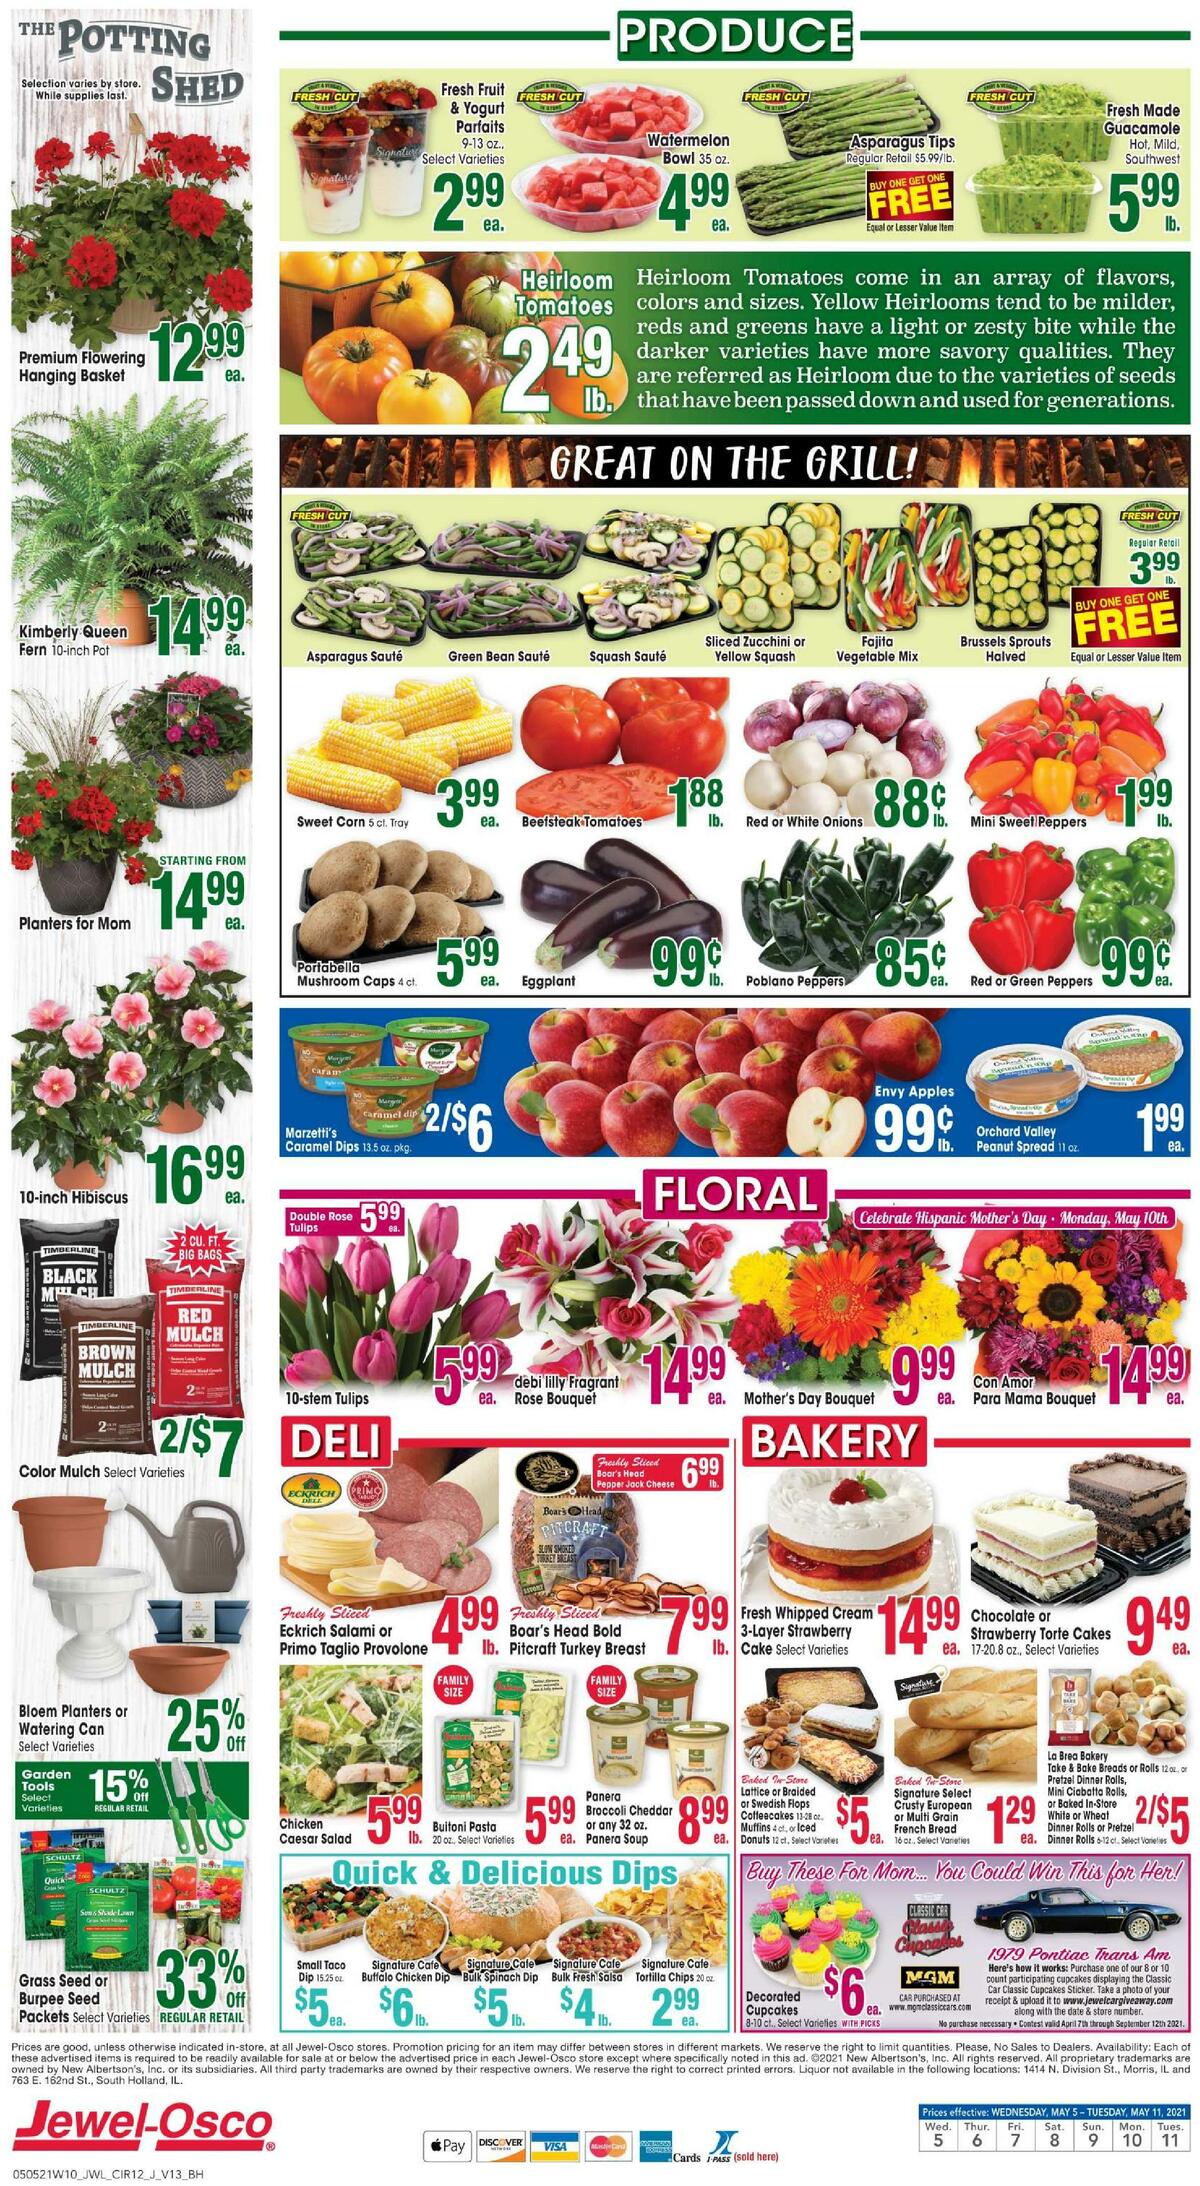 Jewel Osco Weekly Ad from May 5